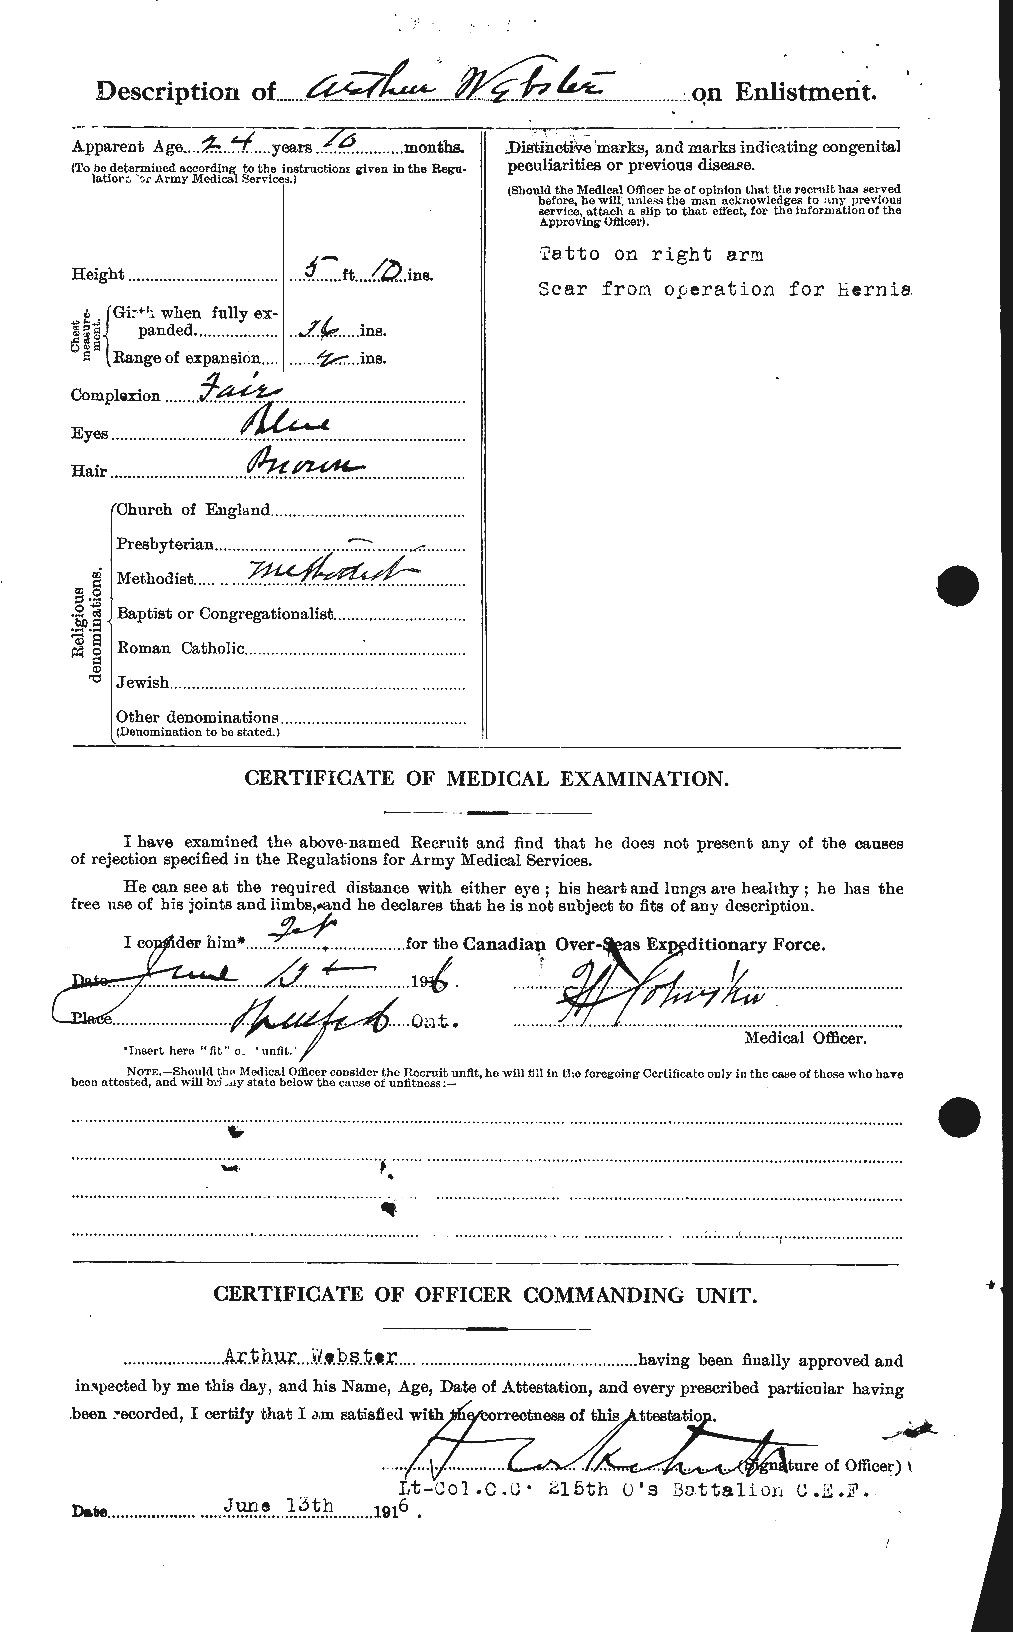 Personnel Records of the First World War - CEF 670260b